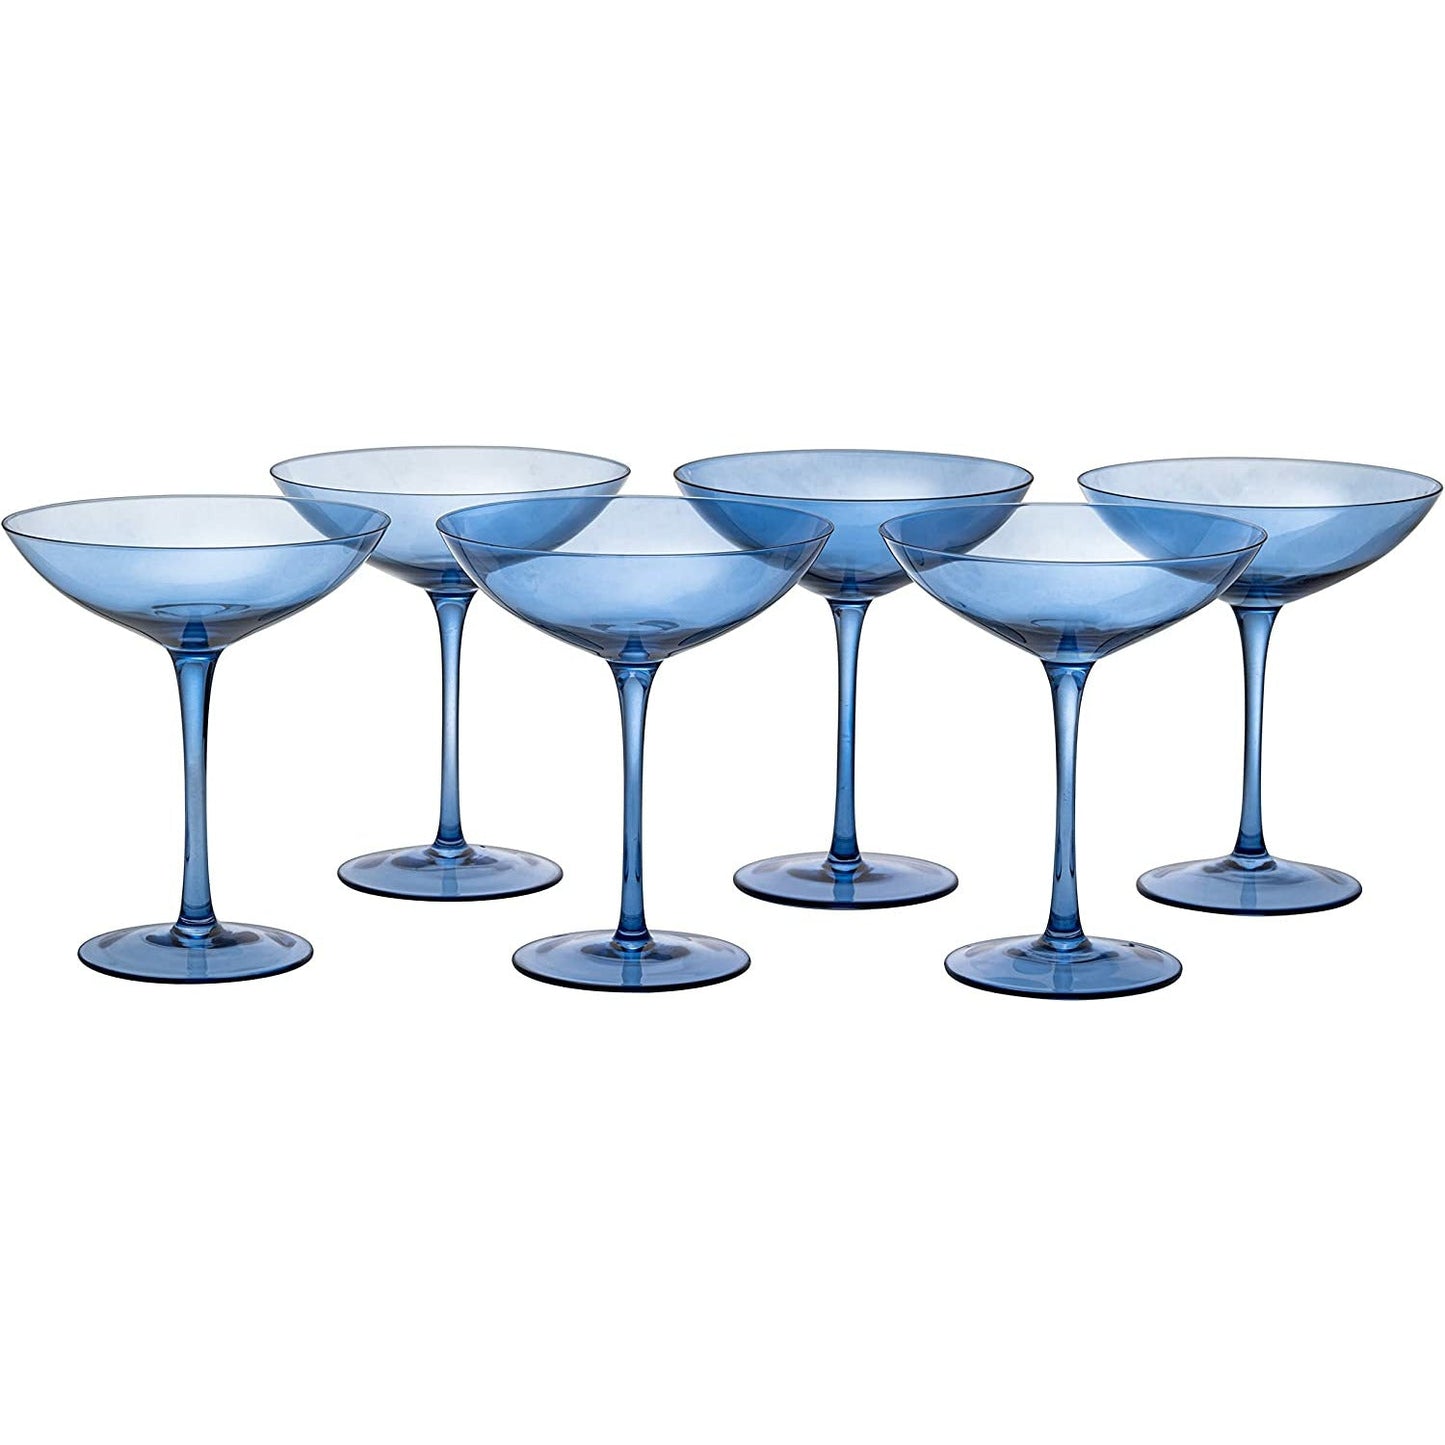 Cobalt Blue Colored Champagne Coupe Glasses 12oz Set of 6 by The Wine Savant - Toasting Glasses, Wedding Party Champagne Cocktail Blue Champagne Colored Glasses Prosecco, Mimosa, Home Bar Glassware-3